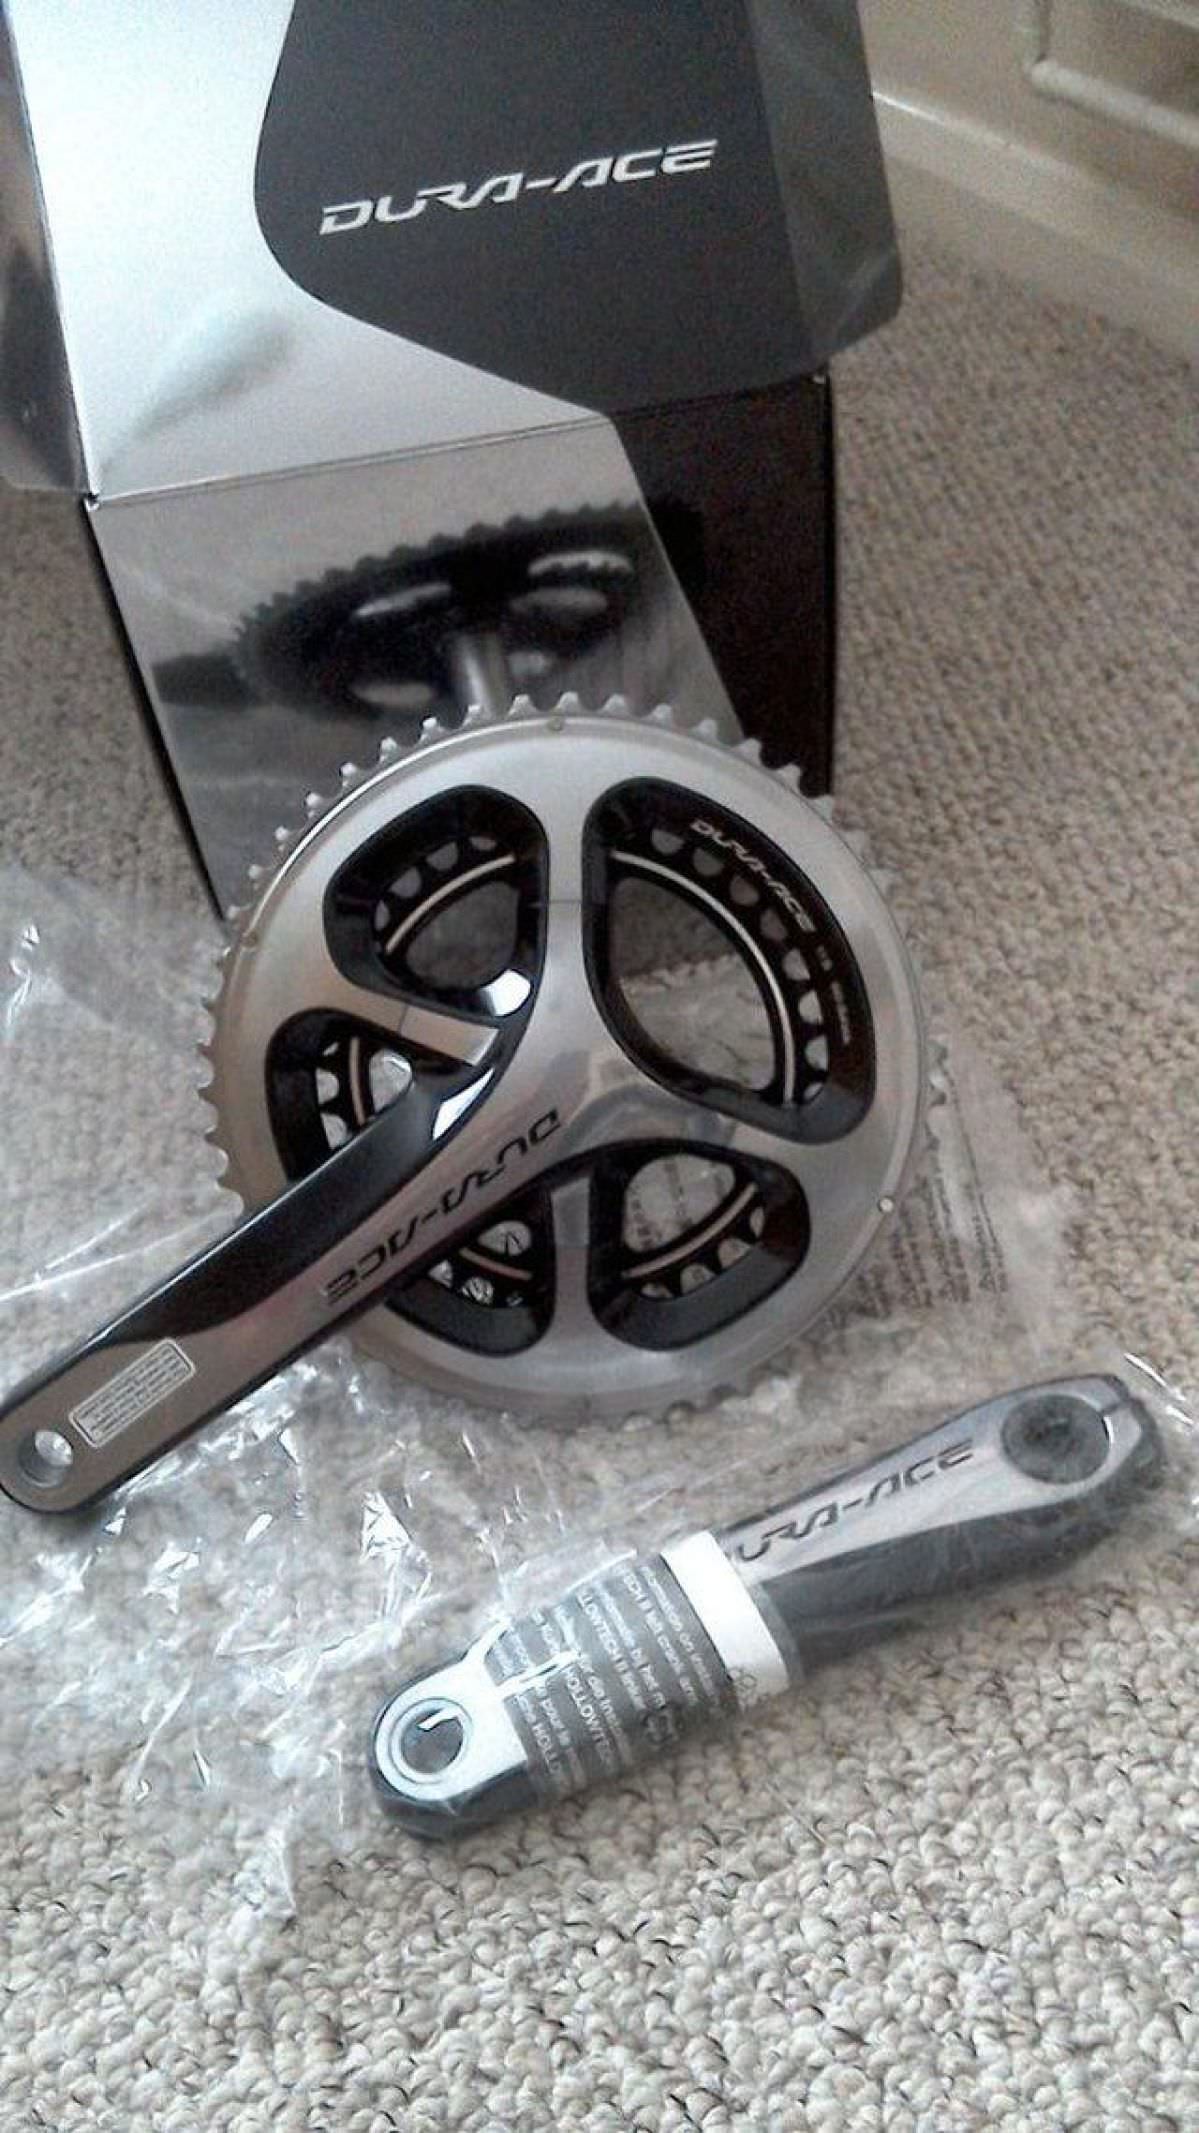 Dura-ace Chainset